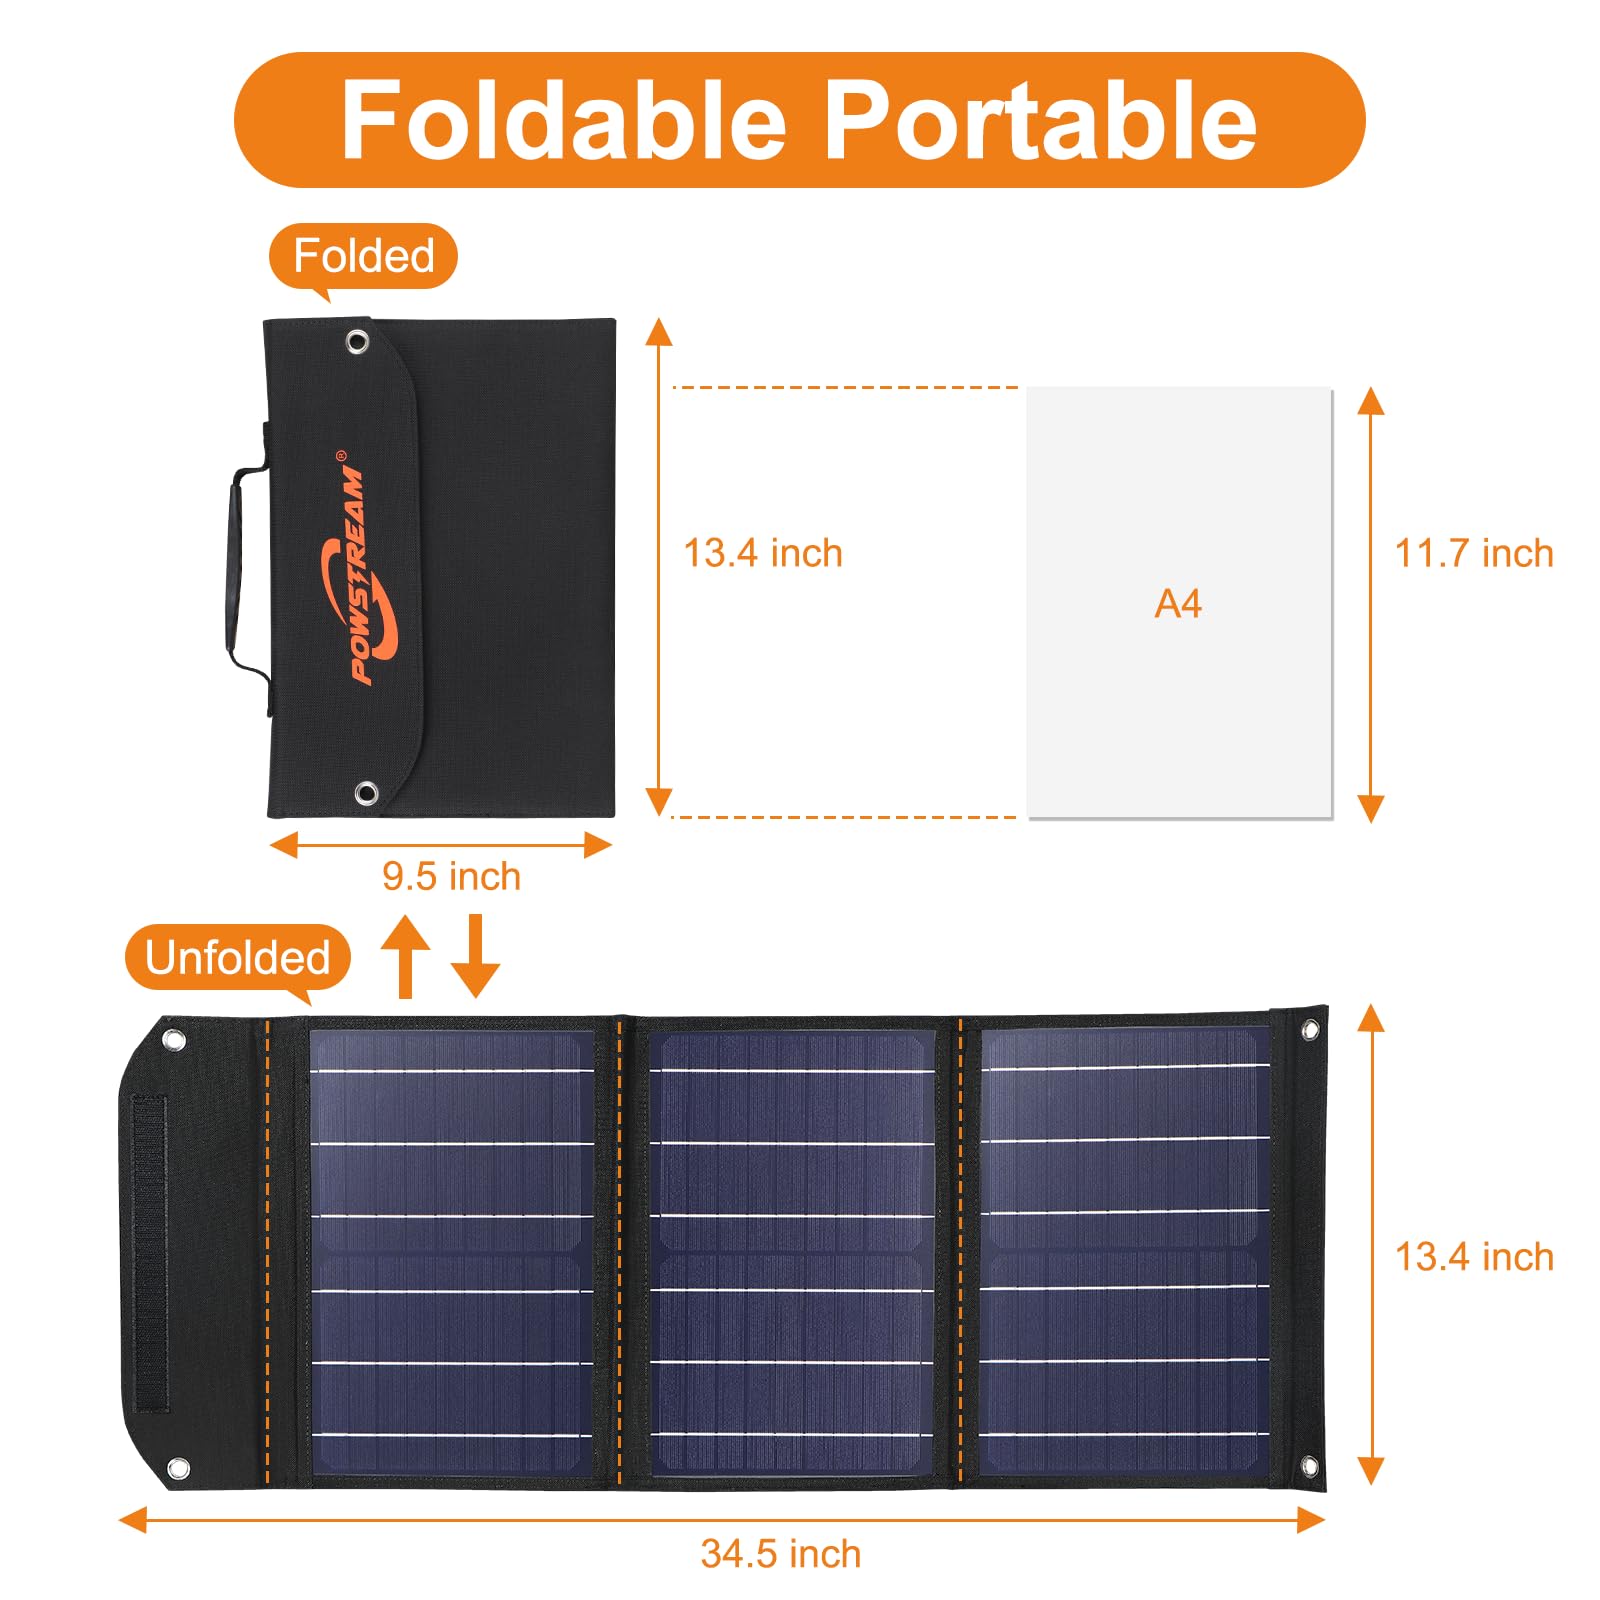 POWSTREAM 30W Portable Foldable Solar Panel with QC3.0 USB Ports & Changeable 10-in-1 DC Head for Power Station Generator Cell Phone iPad Laptop Outdoor Camping RV Trip Home Energy Conservation